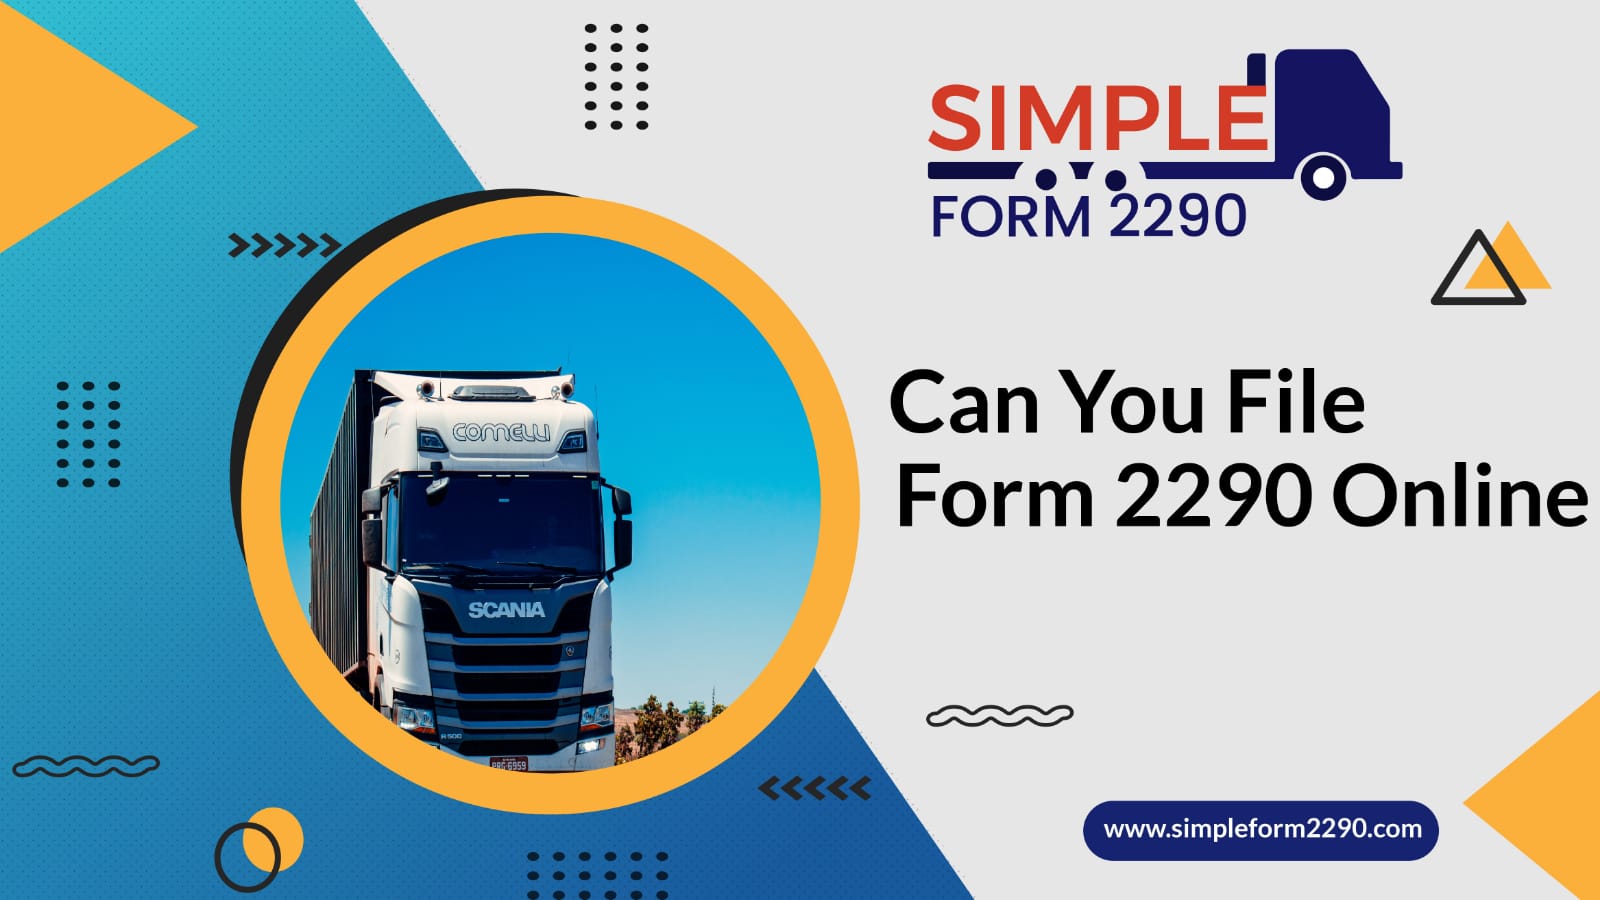 CAN YOU FILE FORM 2290 ONLINE